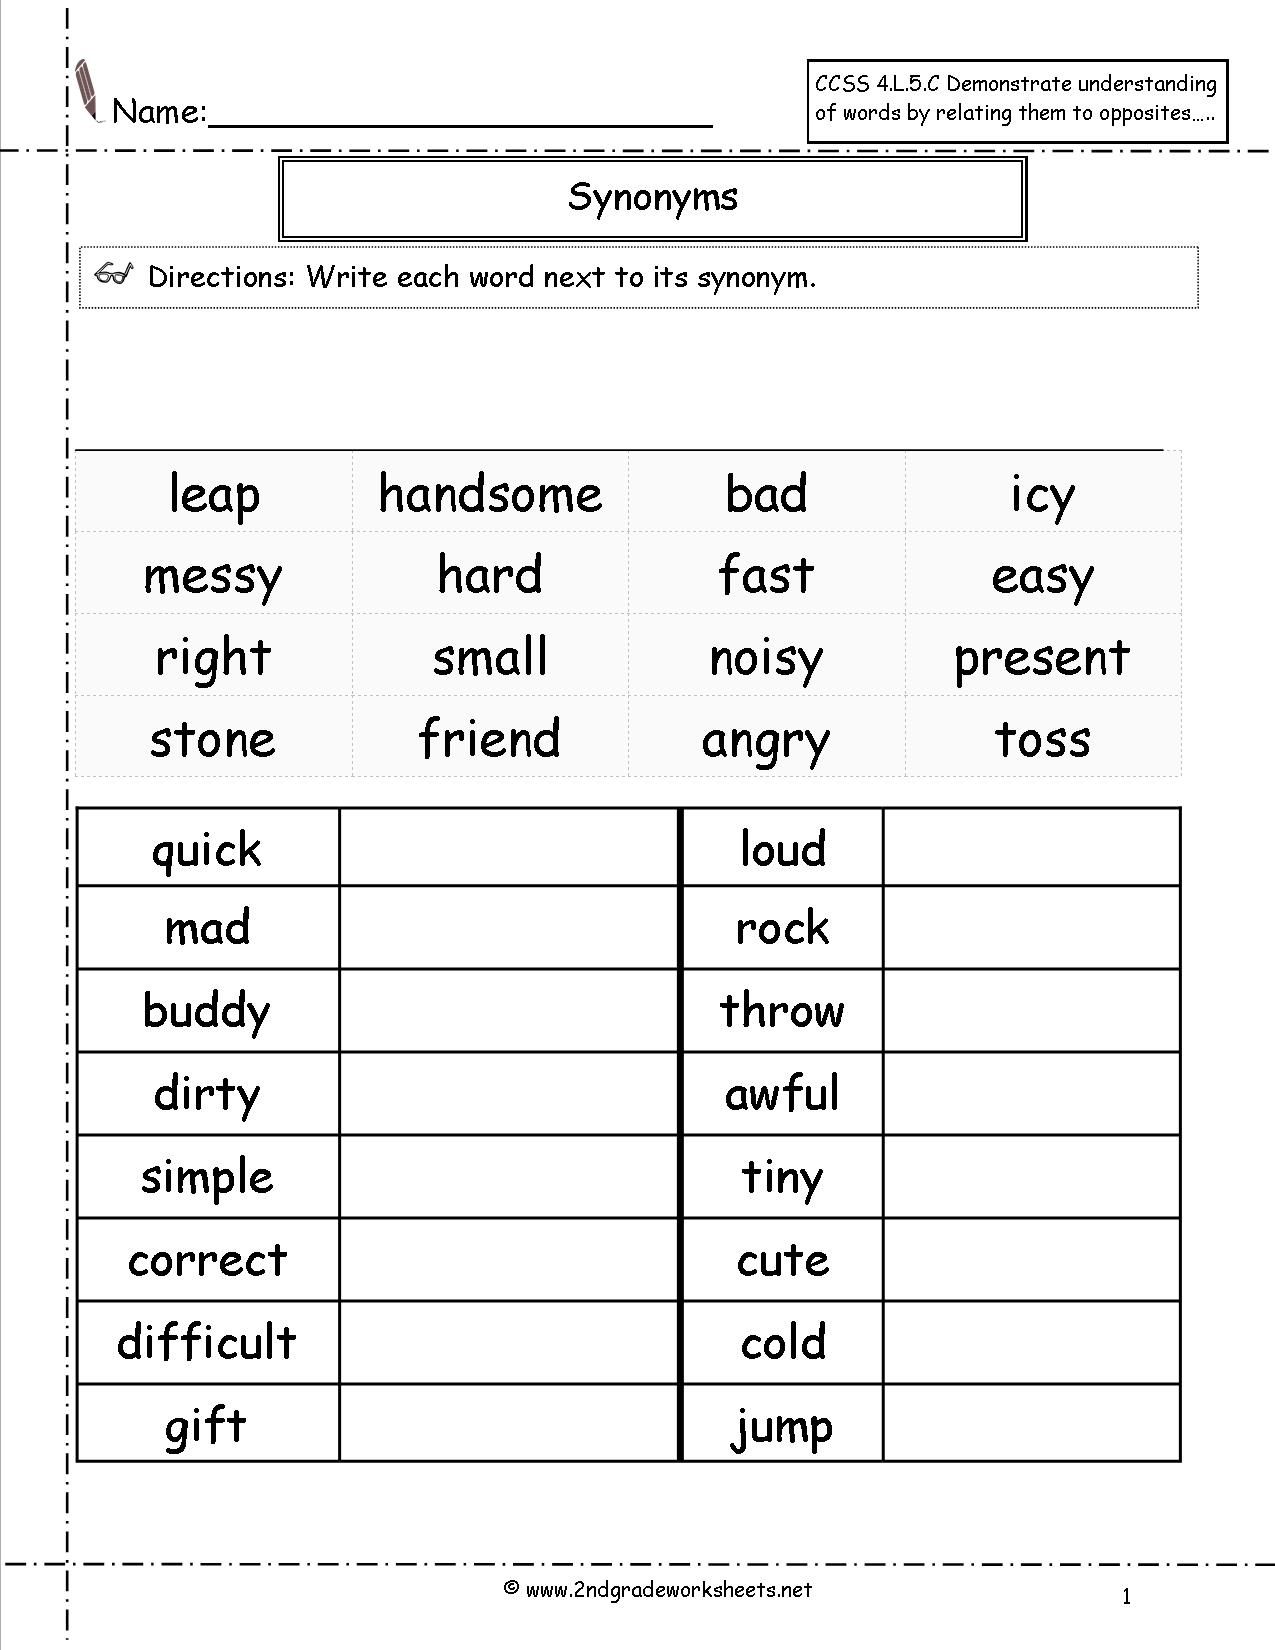 synonyms-and-antonyms-worksheets-3rd-grade